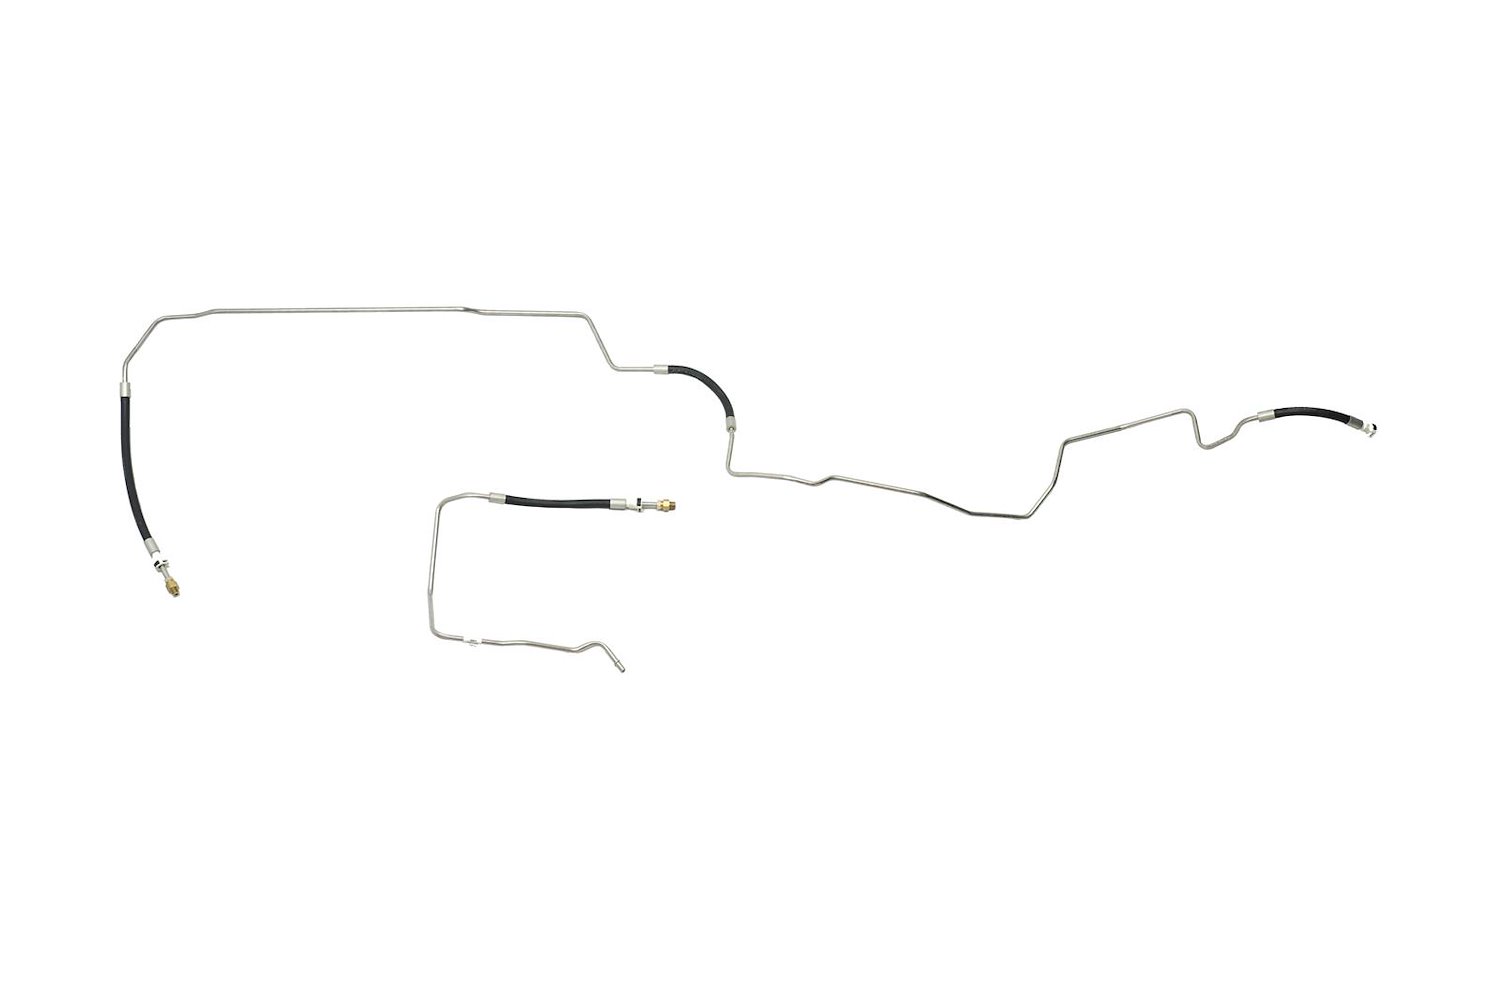 Chevy / GMC Pick Up Fuel Supply Line -2001 2002 2003 2004